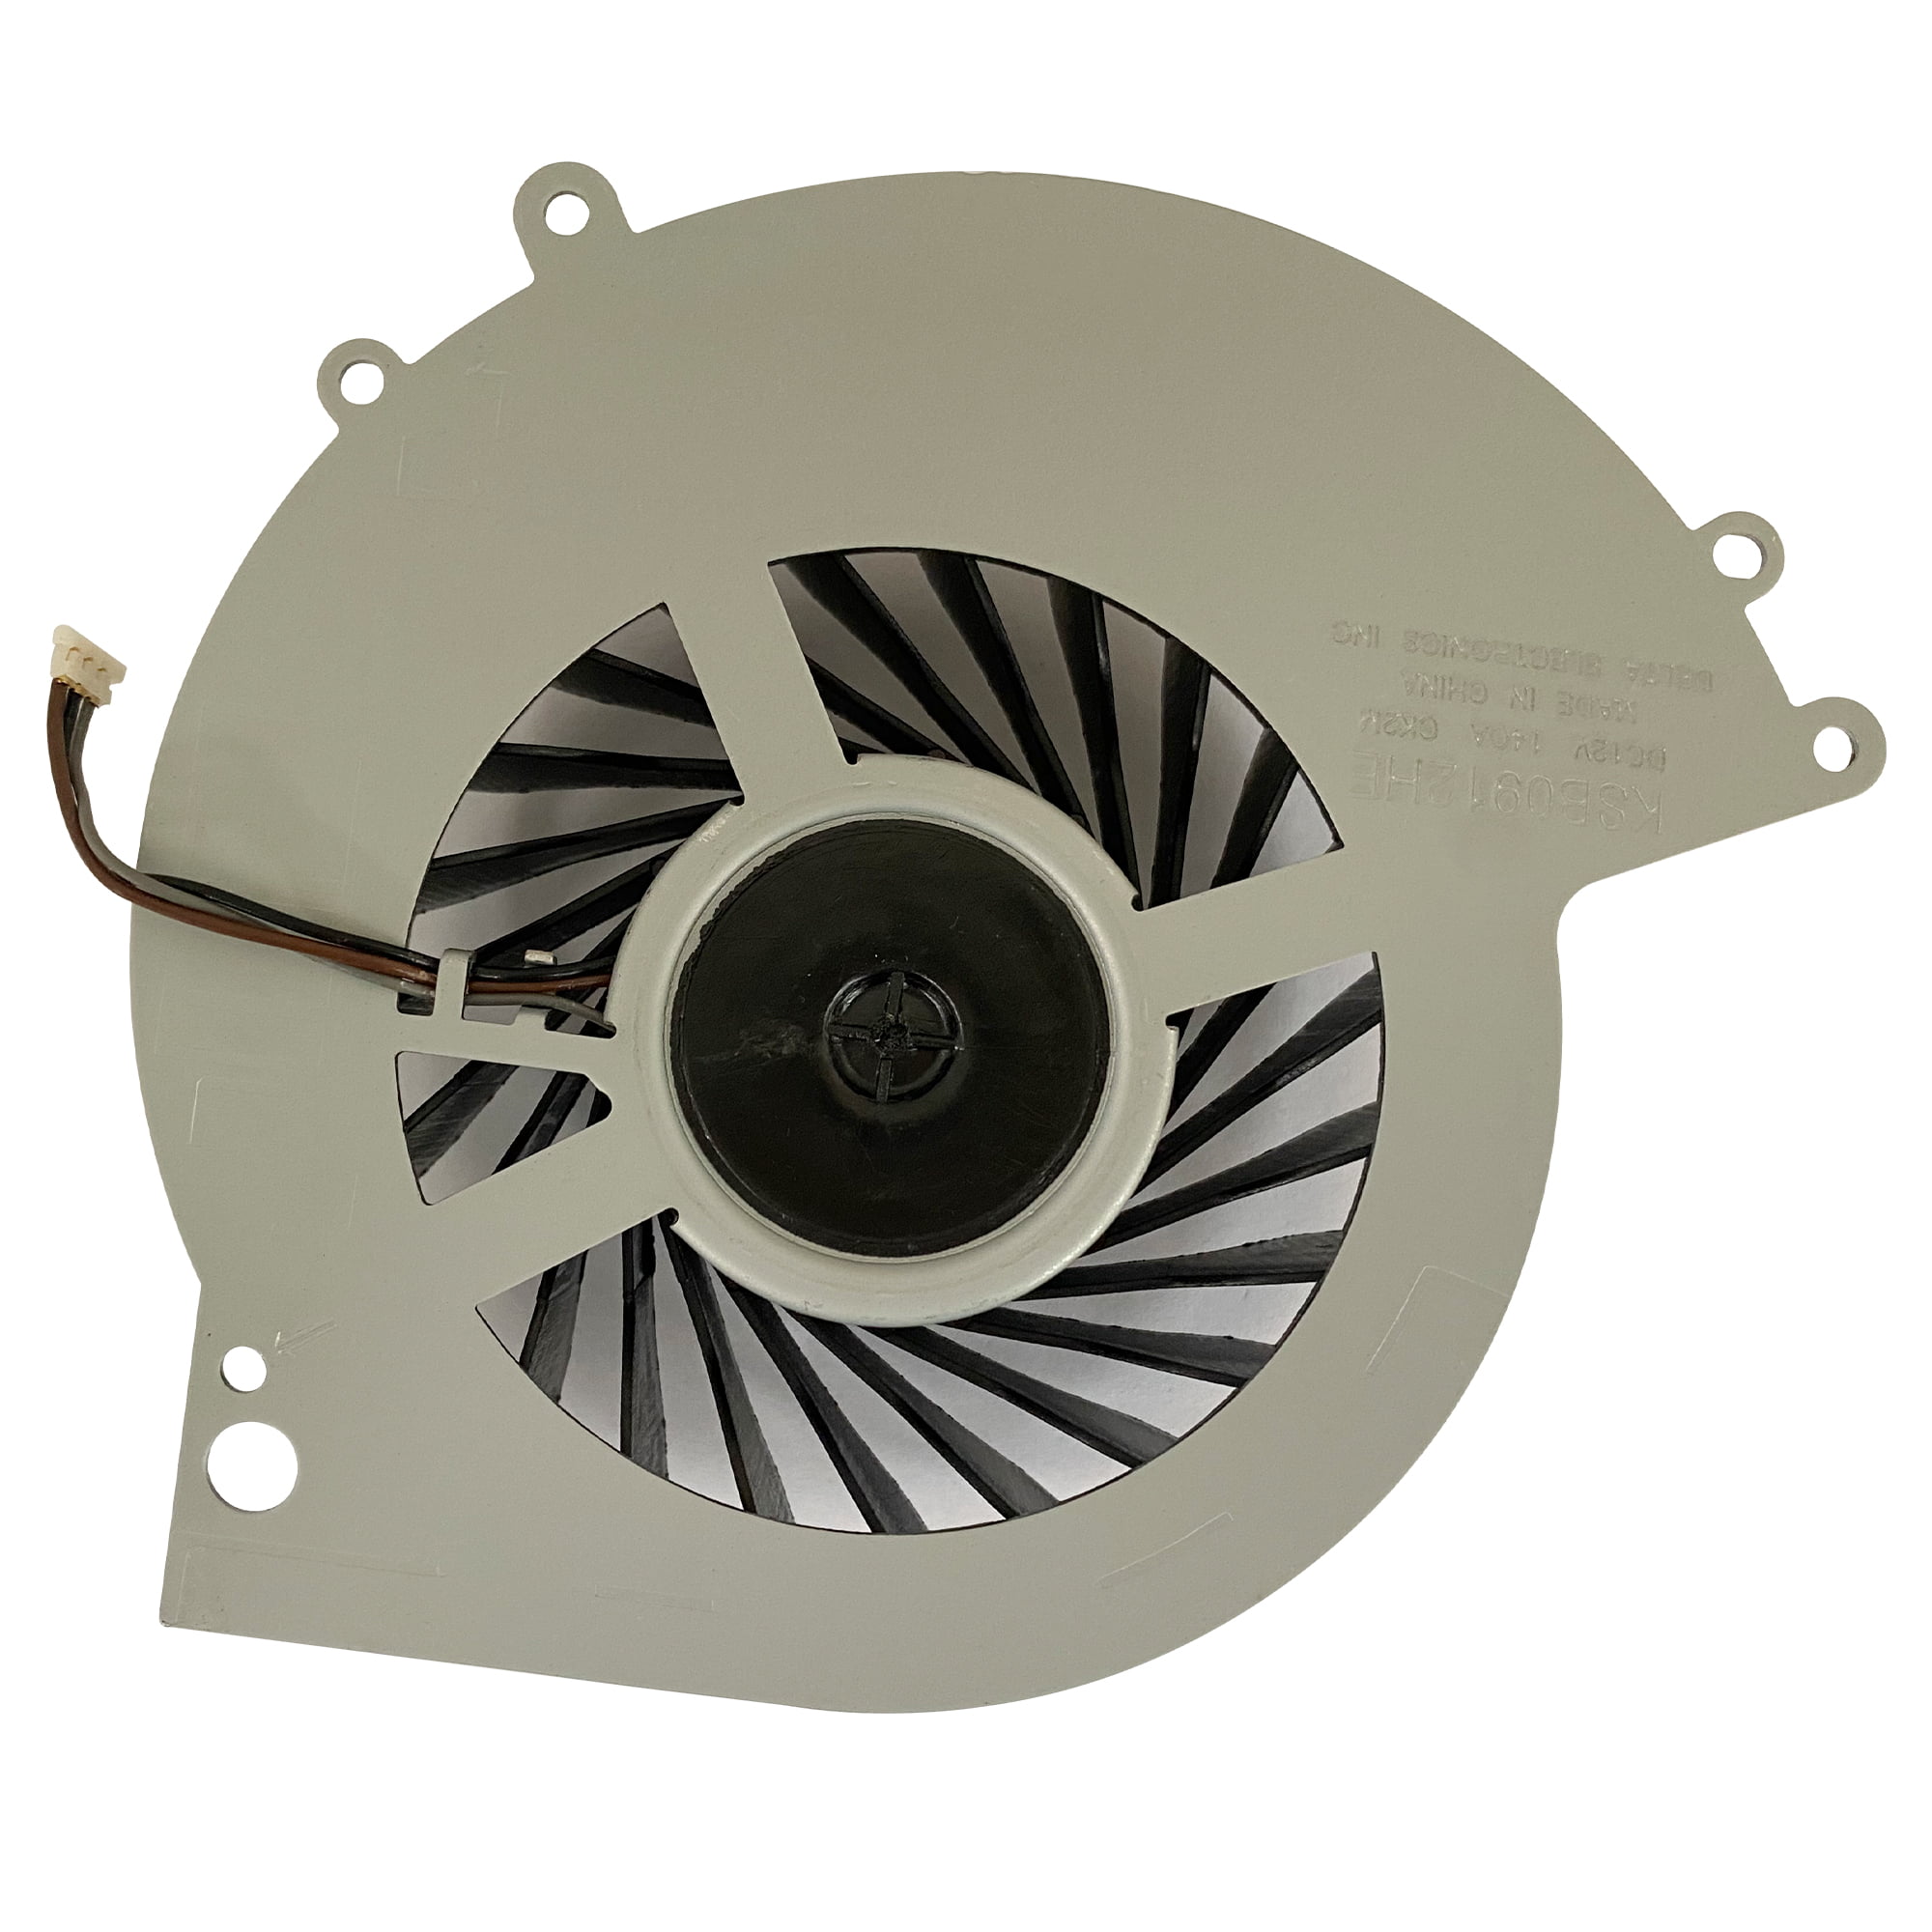 QUETTERLEE Replacement Internal Cooling Fan for Sony PS4 Fan ps4 CUH-1000  CUH-1001A CUH-11XX CUH-1000AB01 CUH-1000AB02 1115A 1115B 500GB KSB0912HE